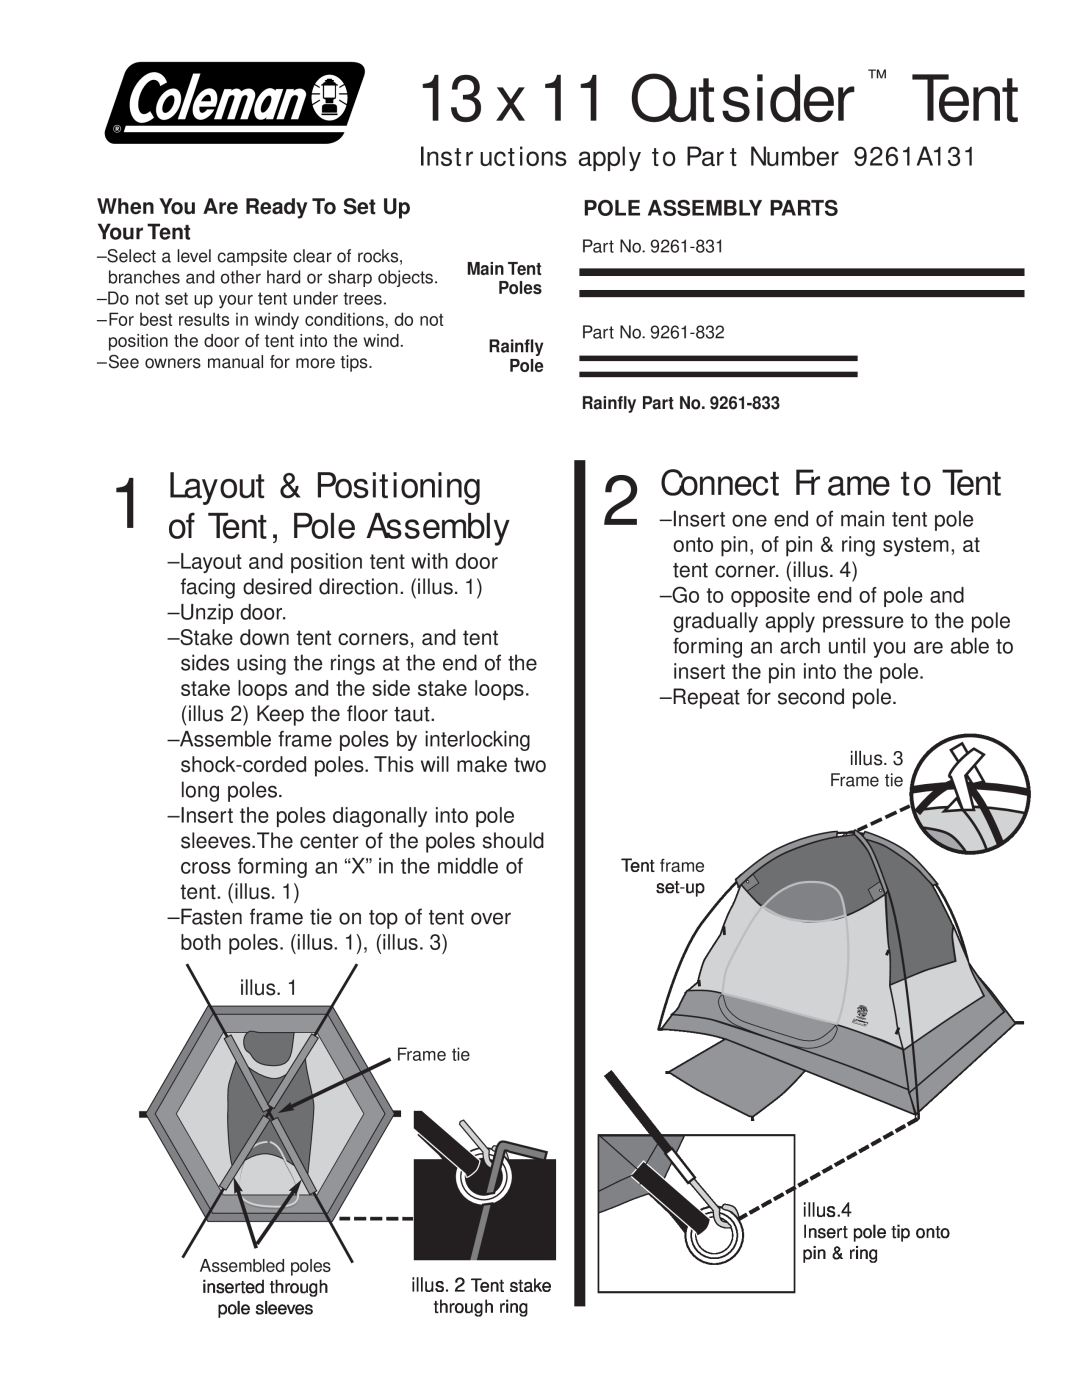 Coleman owner manual Layout & Positioning of Tent, Pole Assembly, 13 x 11 Outsider Tent, Connect Frame to Tent 